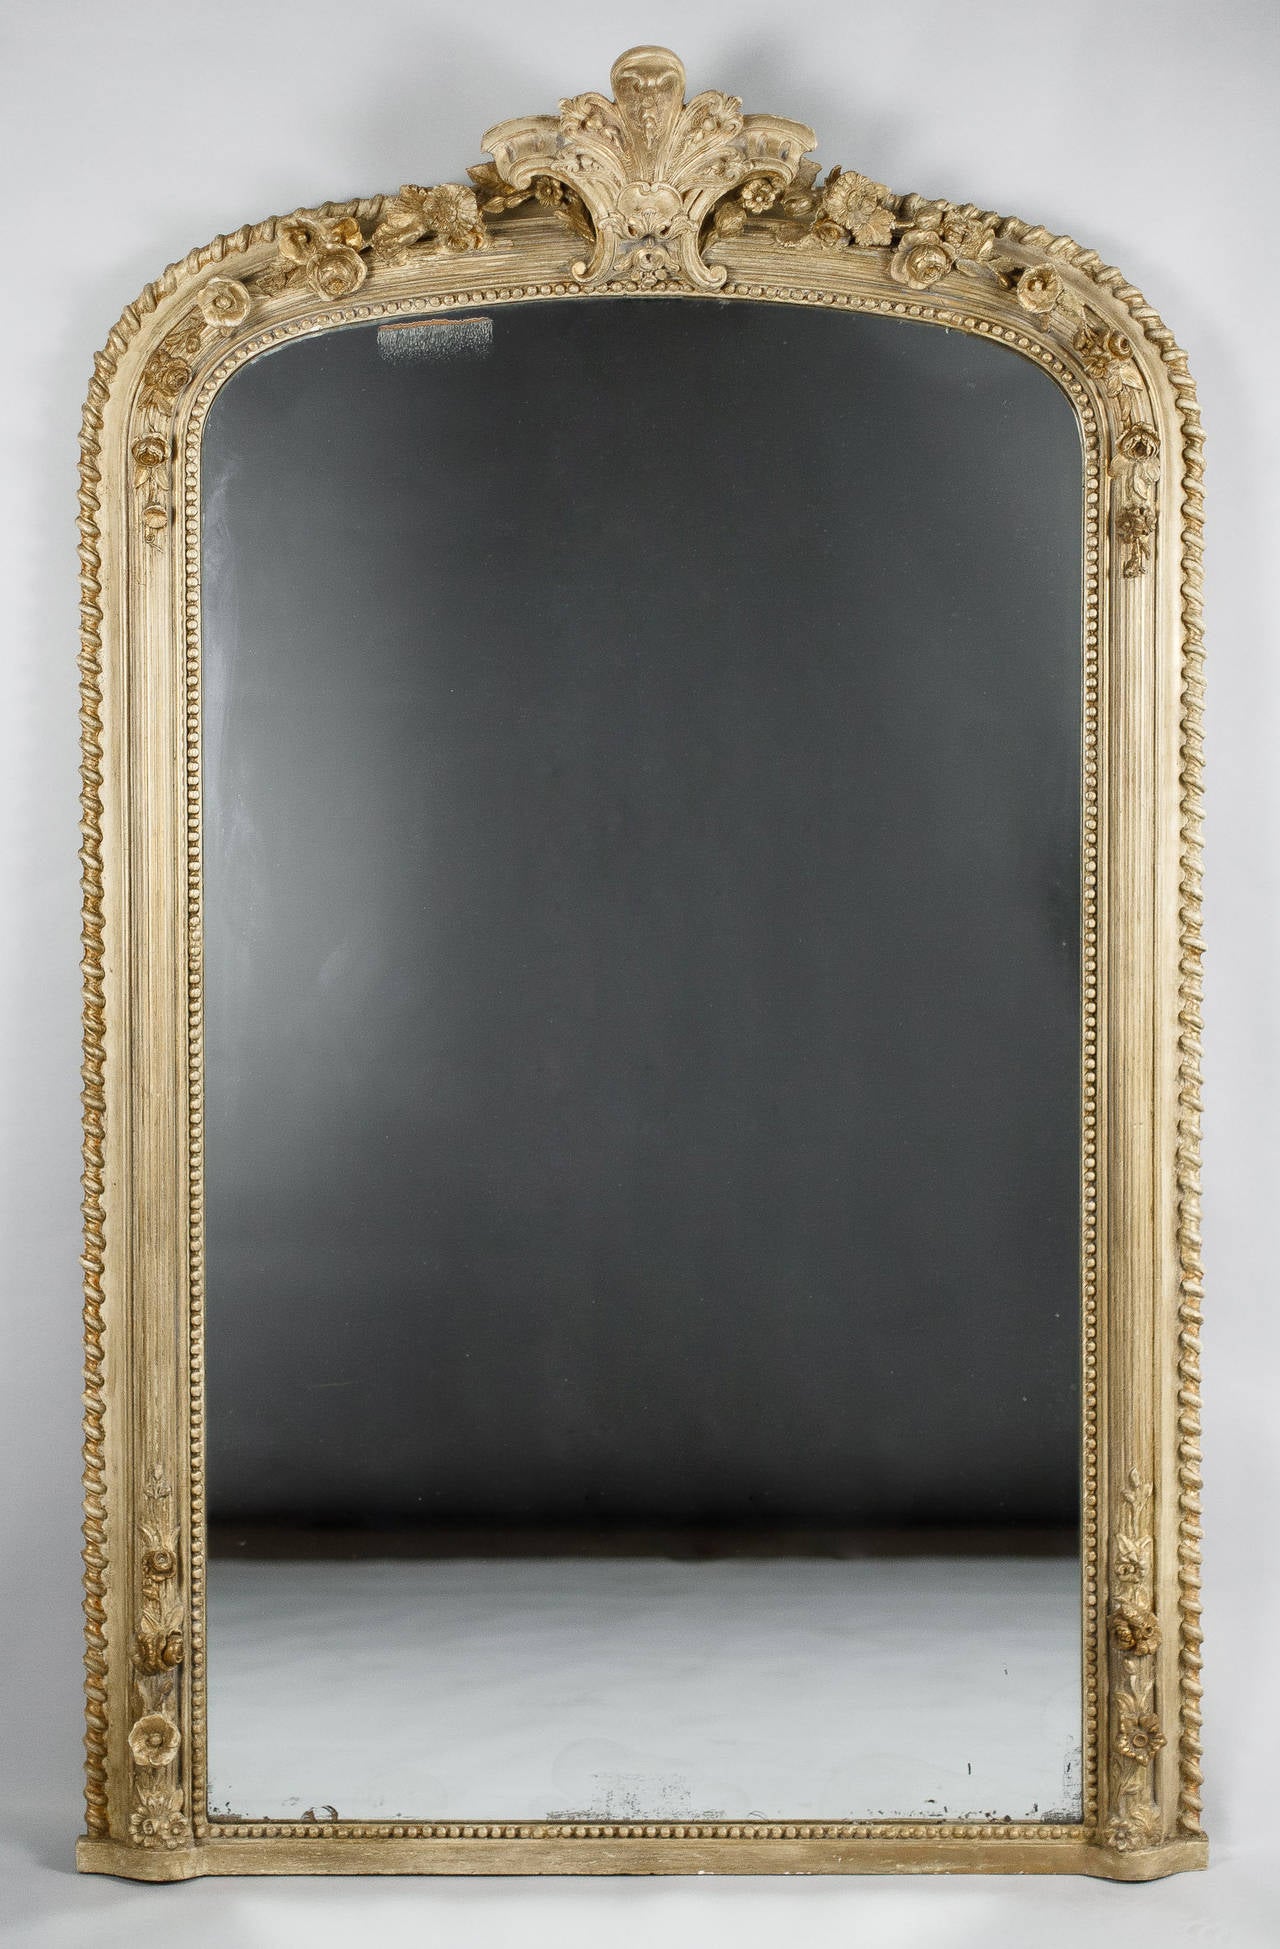 A great six foot tall mirror from the Napoleon III period that was painted off-white. The frame has an arched top with a cartouche in its centre and motifs of sculpted flowers. The frame also has motifs of beads around the mirror and scrolls at the